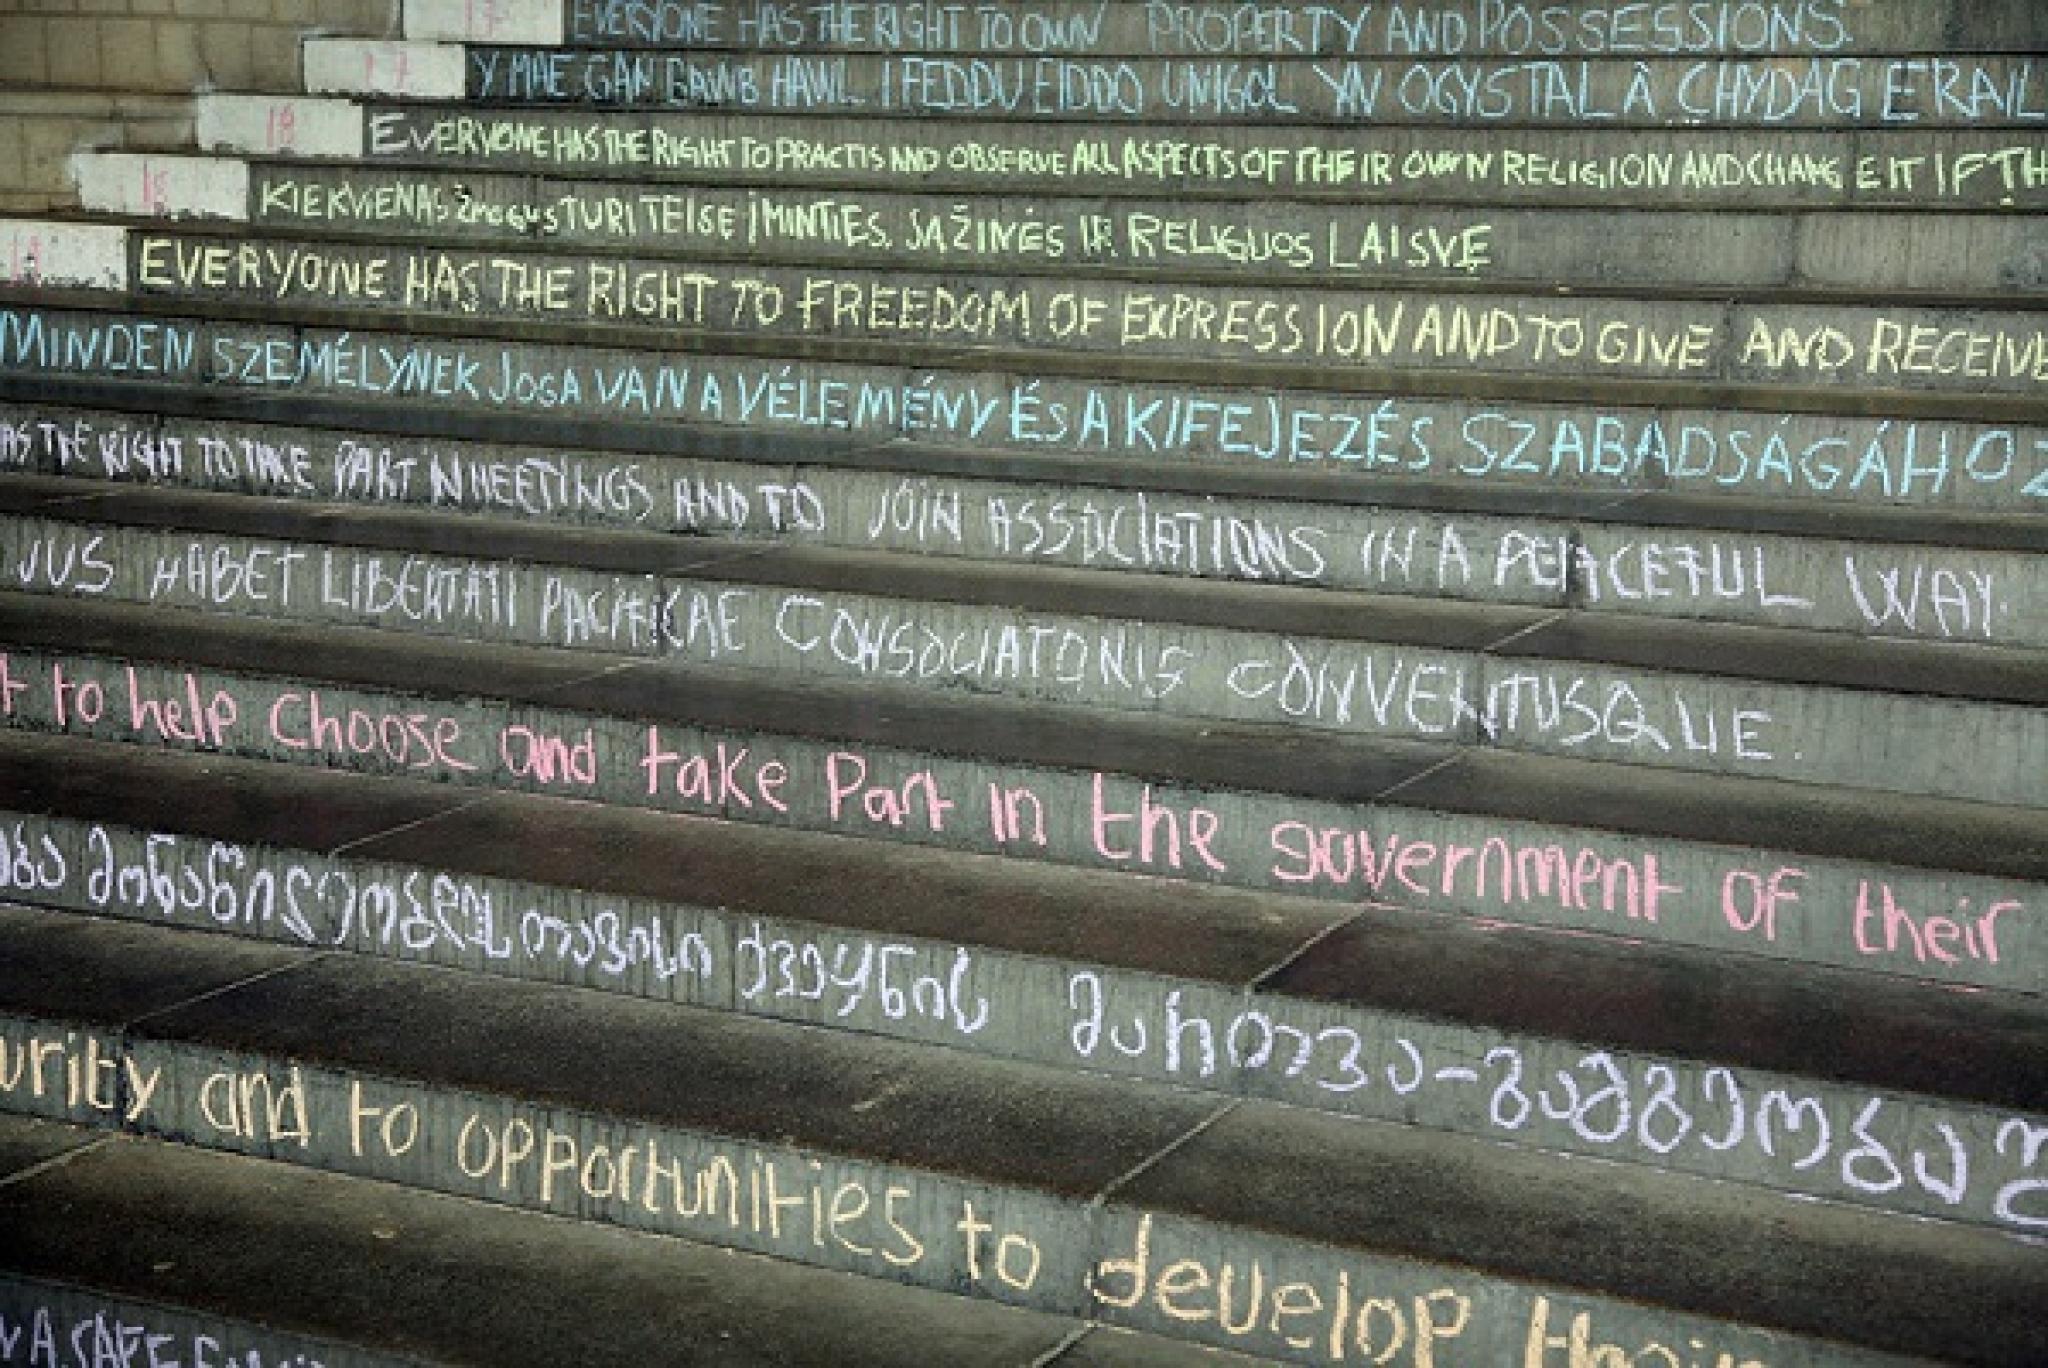 Image of the articles of the Universal Declaration of Human Rights chalked on the steps of University of Essex, by University of Essex at https://flic.kr/p/ifvFD5, free to use under CC BY 2.0 DEED licence 